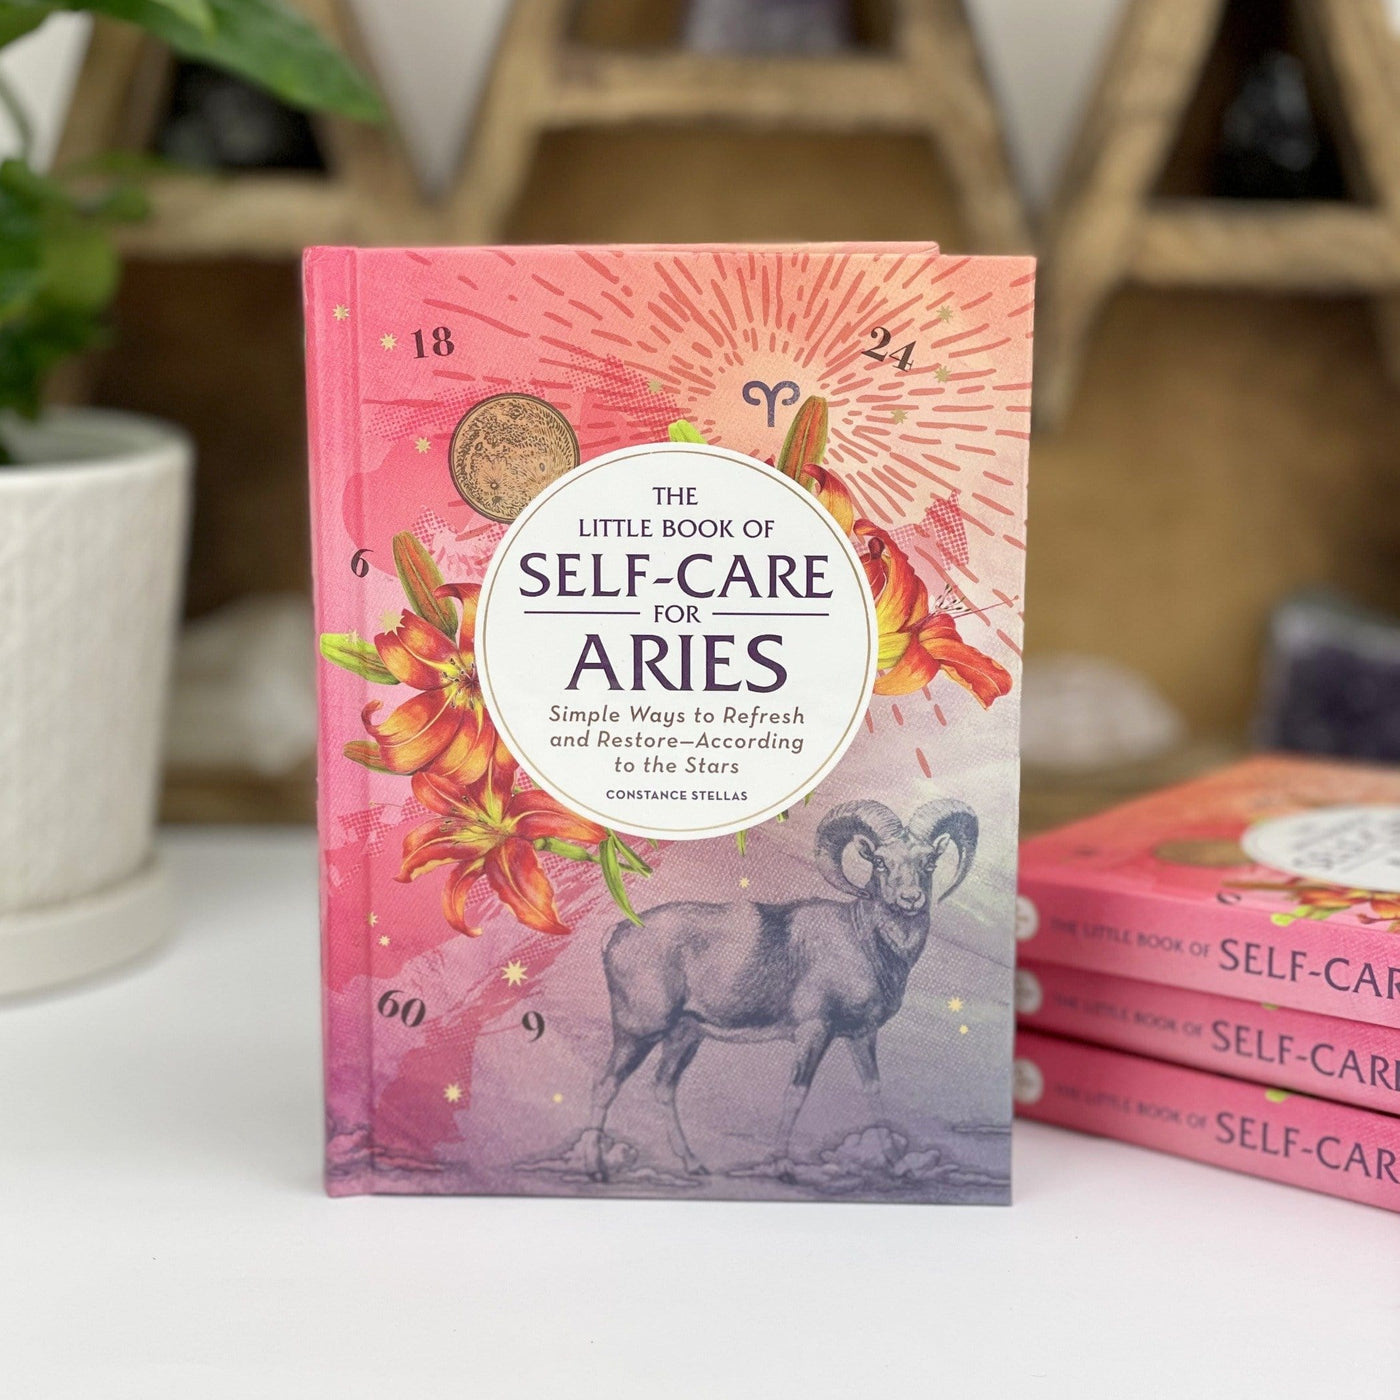 The Little Book of Self-Care for Aries Book in a pink color